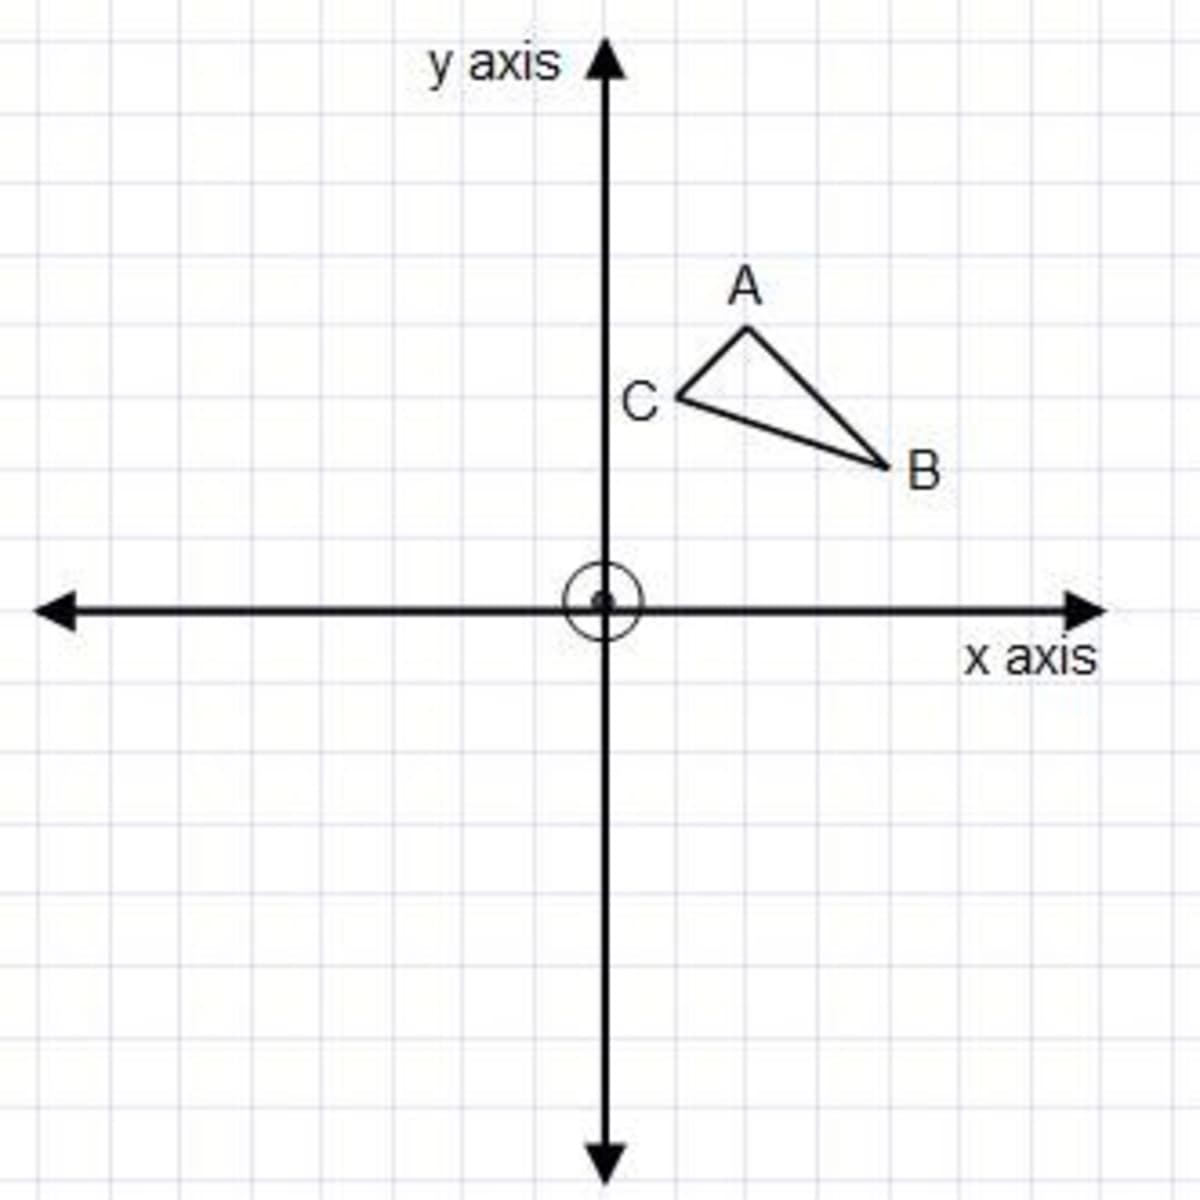 Examples on how to reflect a shape in the x-axis or y-axis on a